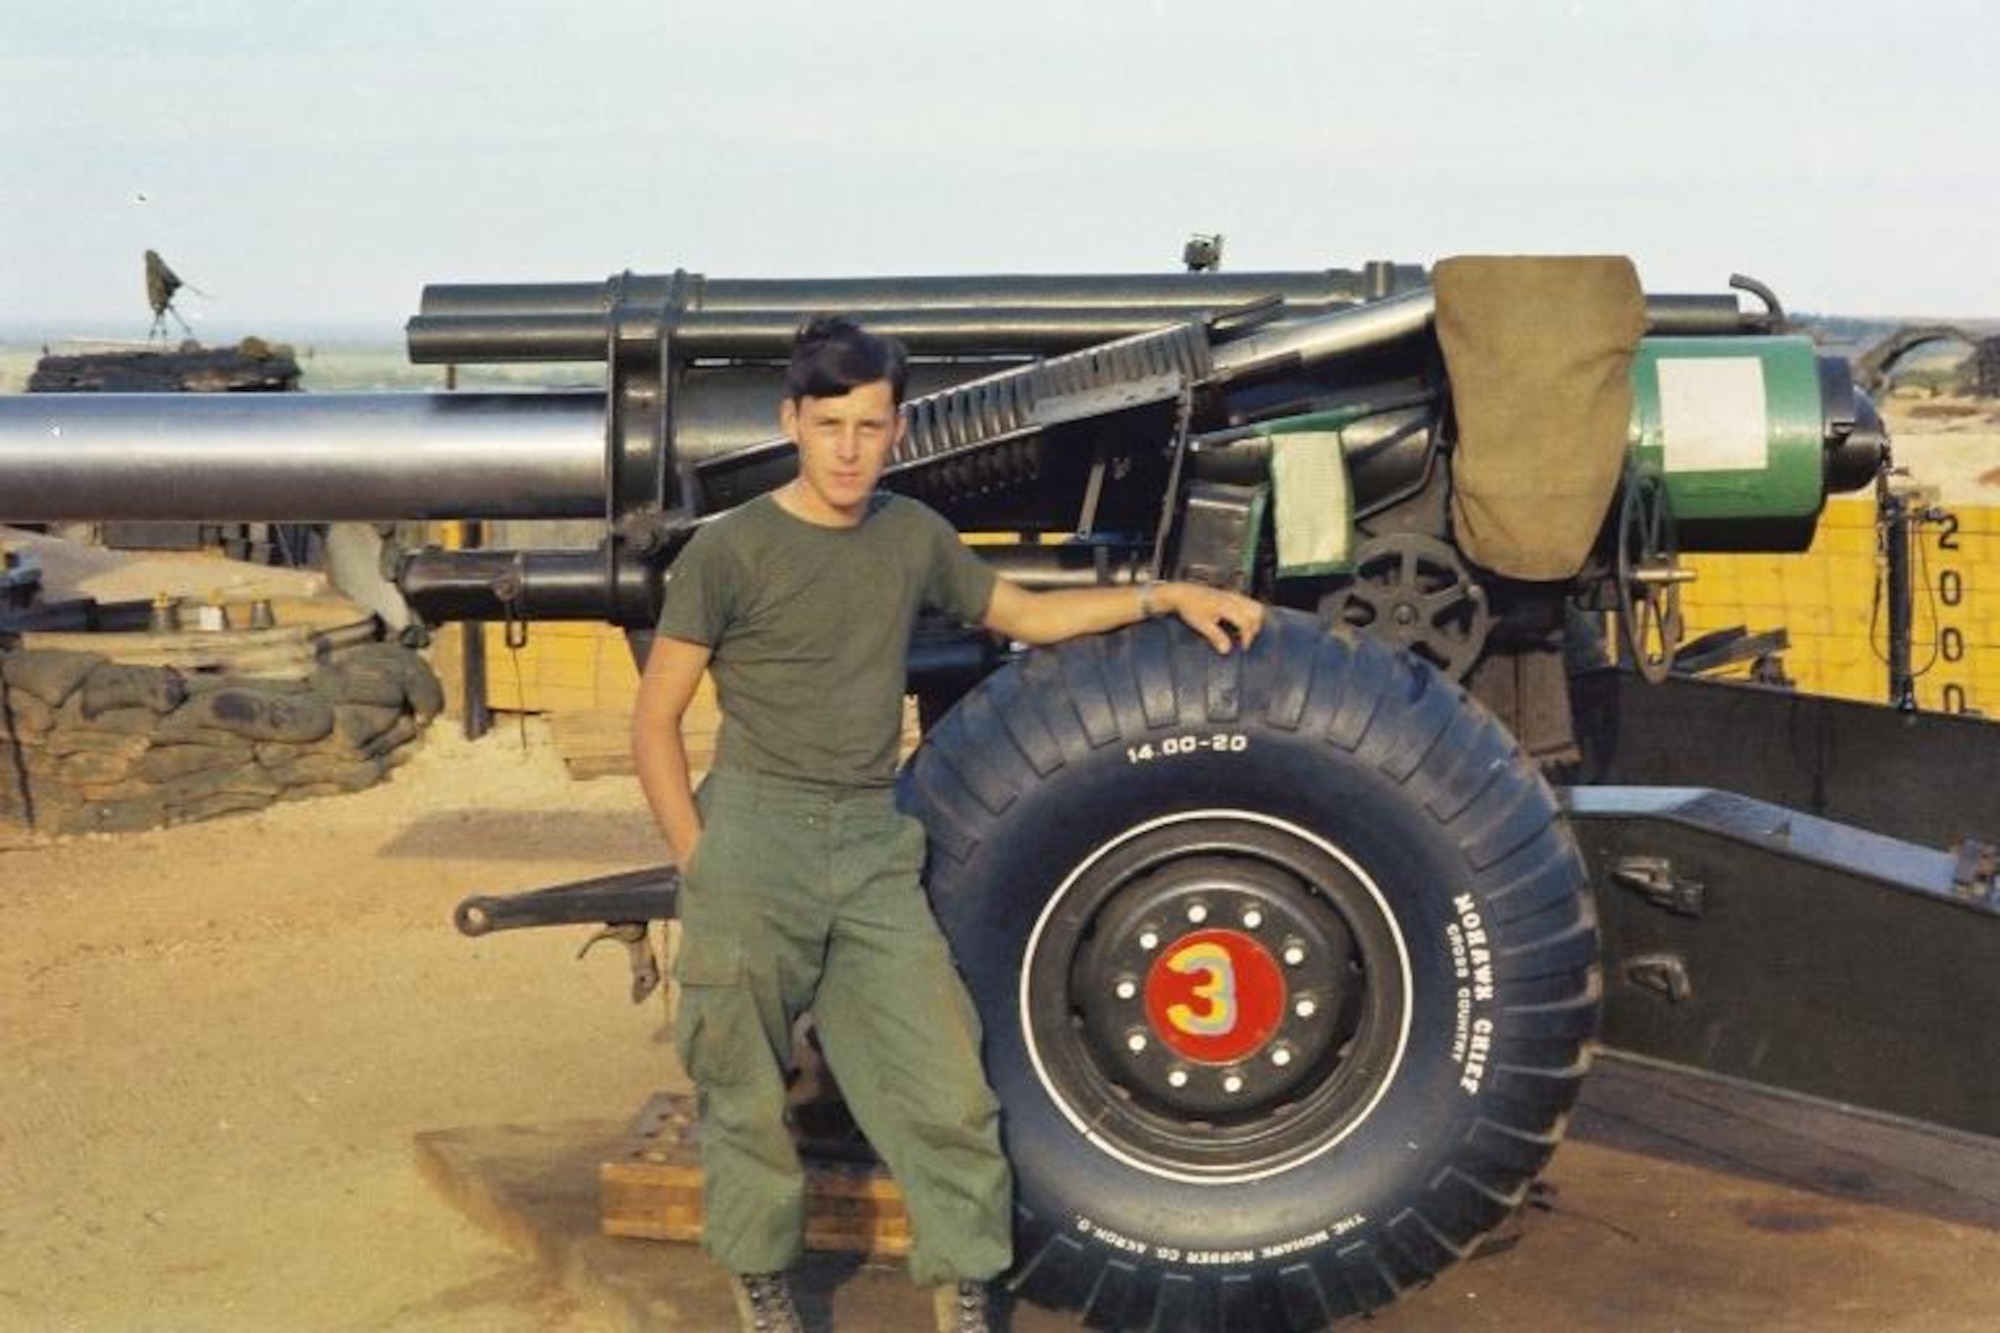 Side view of the M114 155mm Howitzer as used by the US Army in South Vietnam during the war in Southeast Asia. The weapon first entered US service in 1942 and served reliably through much of the Cold War era as well,  This howitzer had a maximum firing range of about 16,000 yards.  It was replaced by the M198 howitzer from 1979.  (Courtesy Carl Falk)